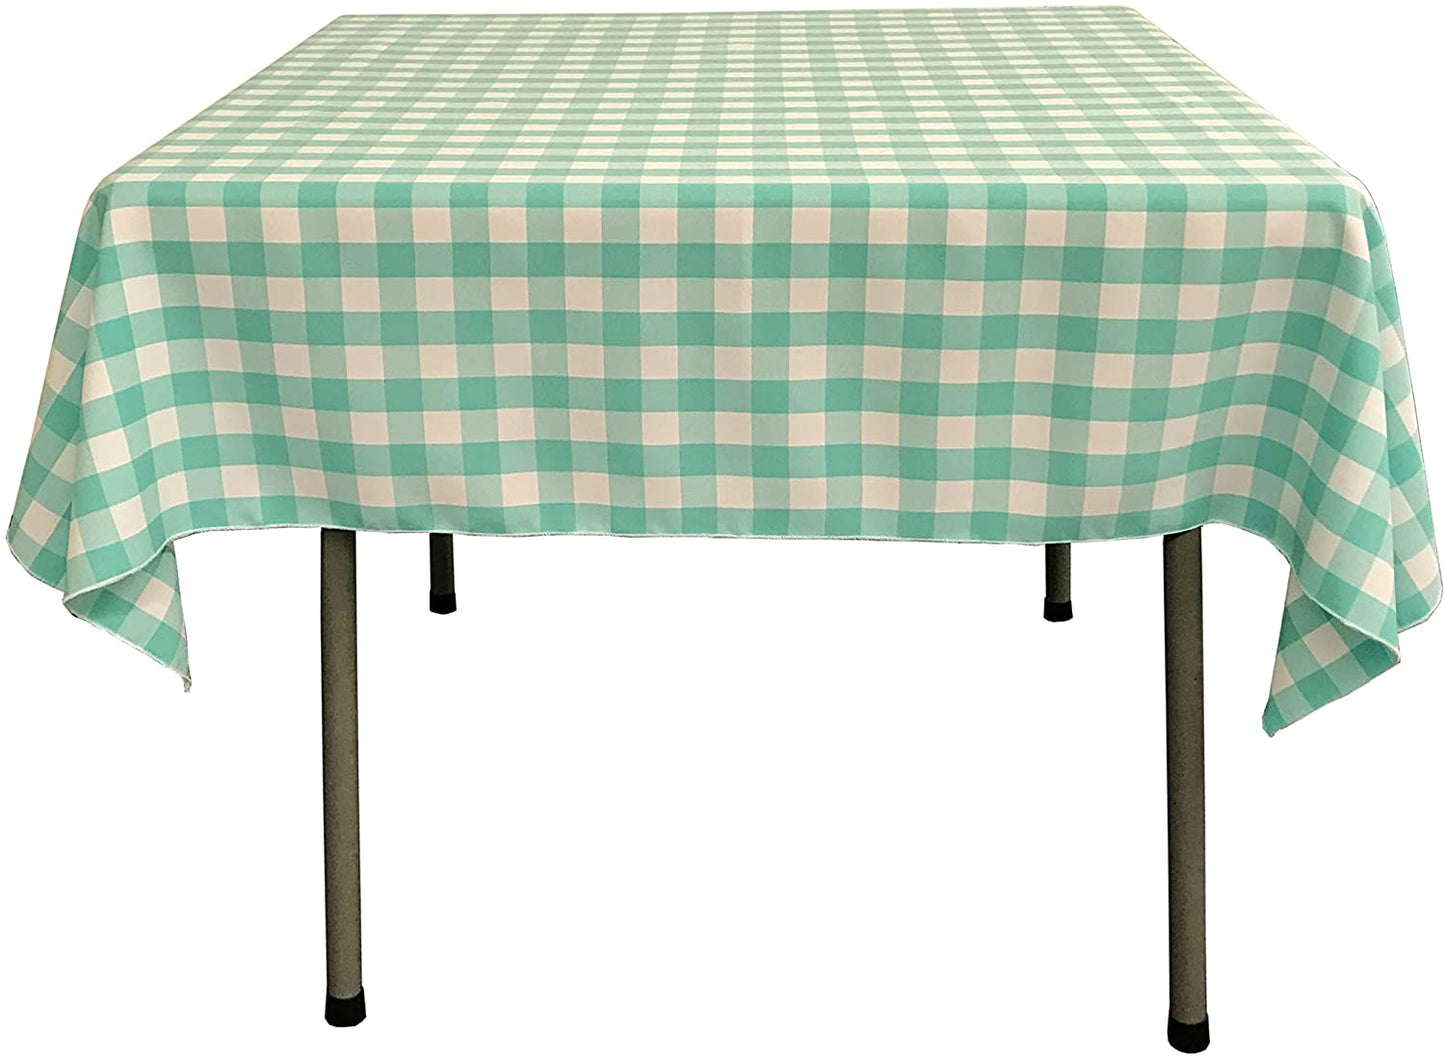 Gingham Checkered Square Tablecloth Mint and White